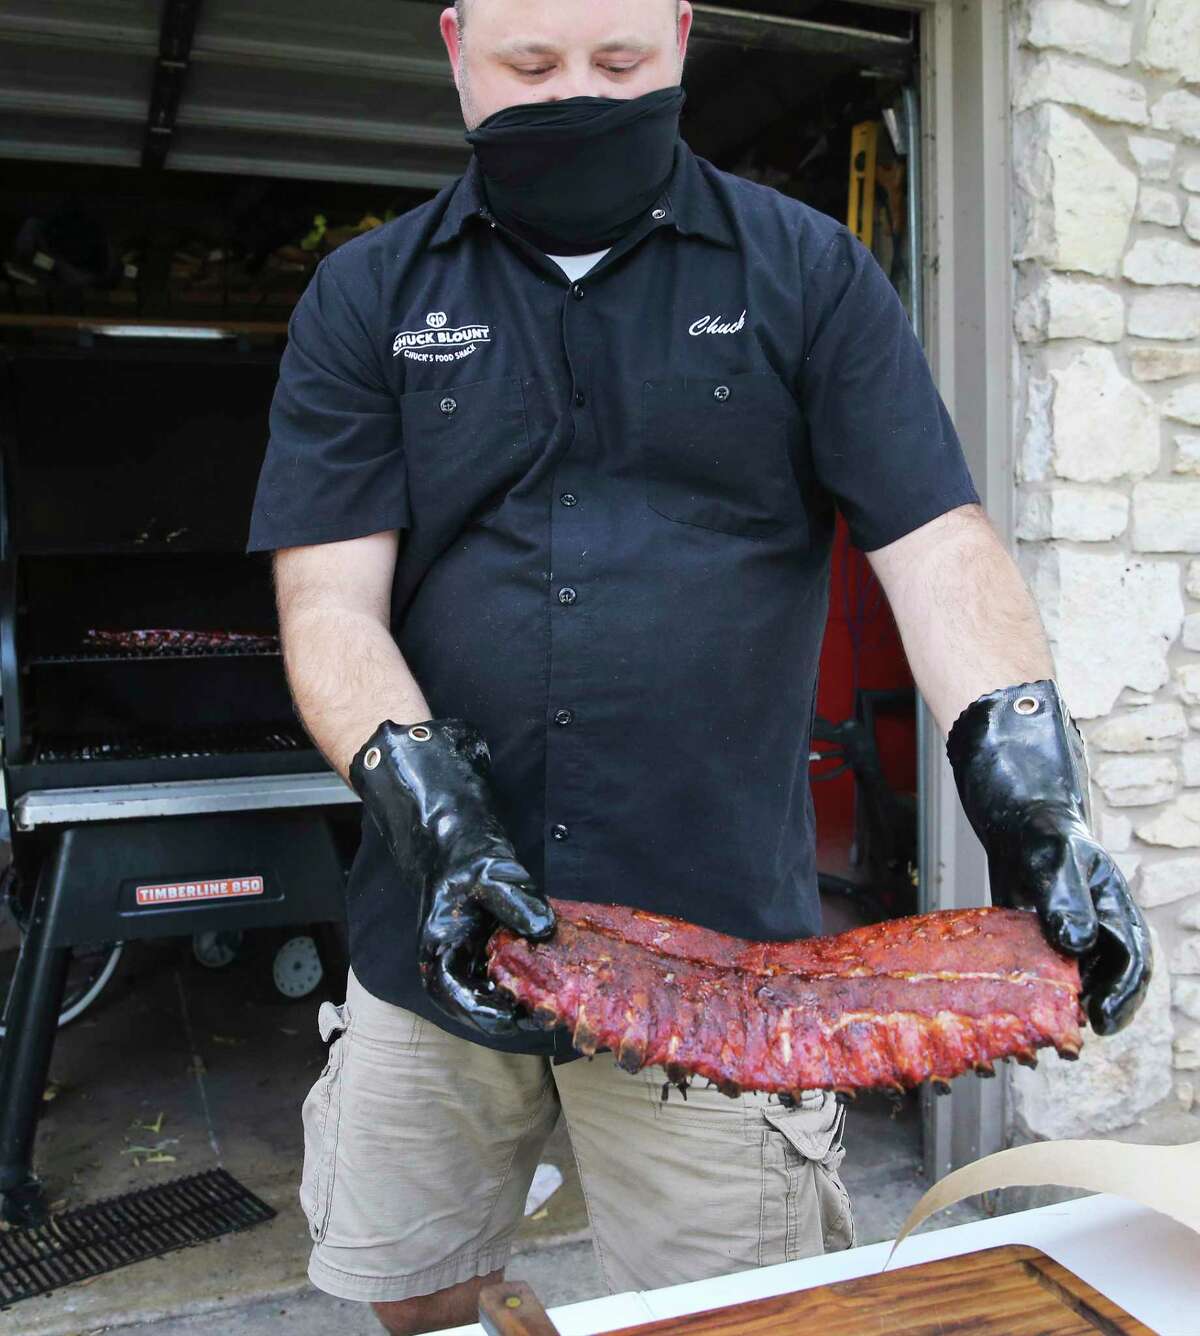 Chuck Blount removes baby back ribs from the smoker after a nearly three-hour cooking time.